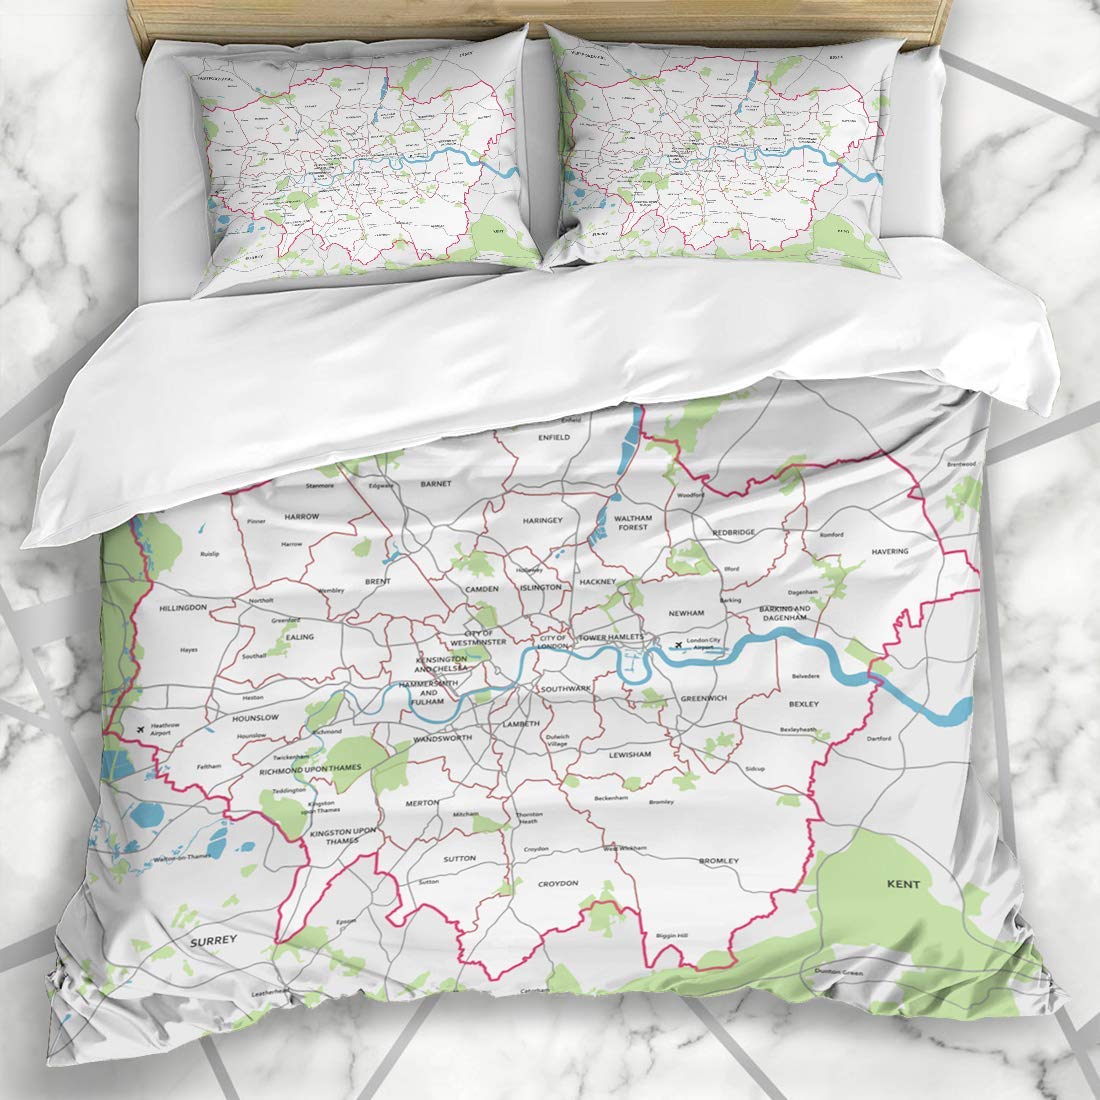 Anyway, I'll end this daft, indulgent thread with a duvet cover that is blatantly too much like taking work home.